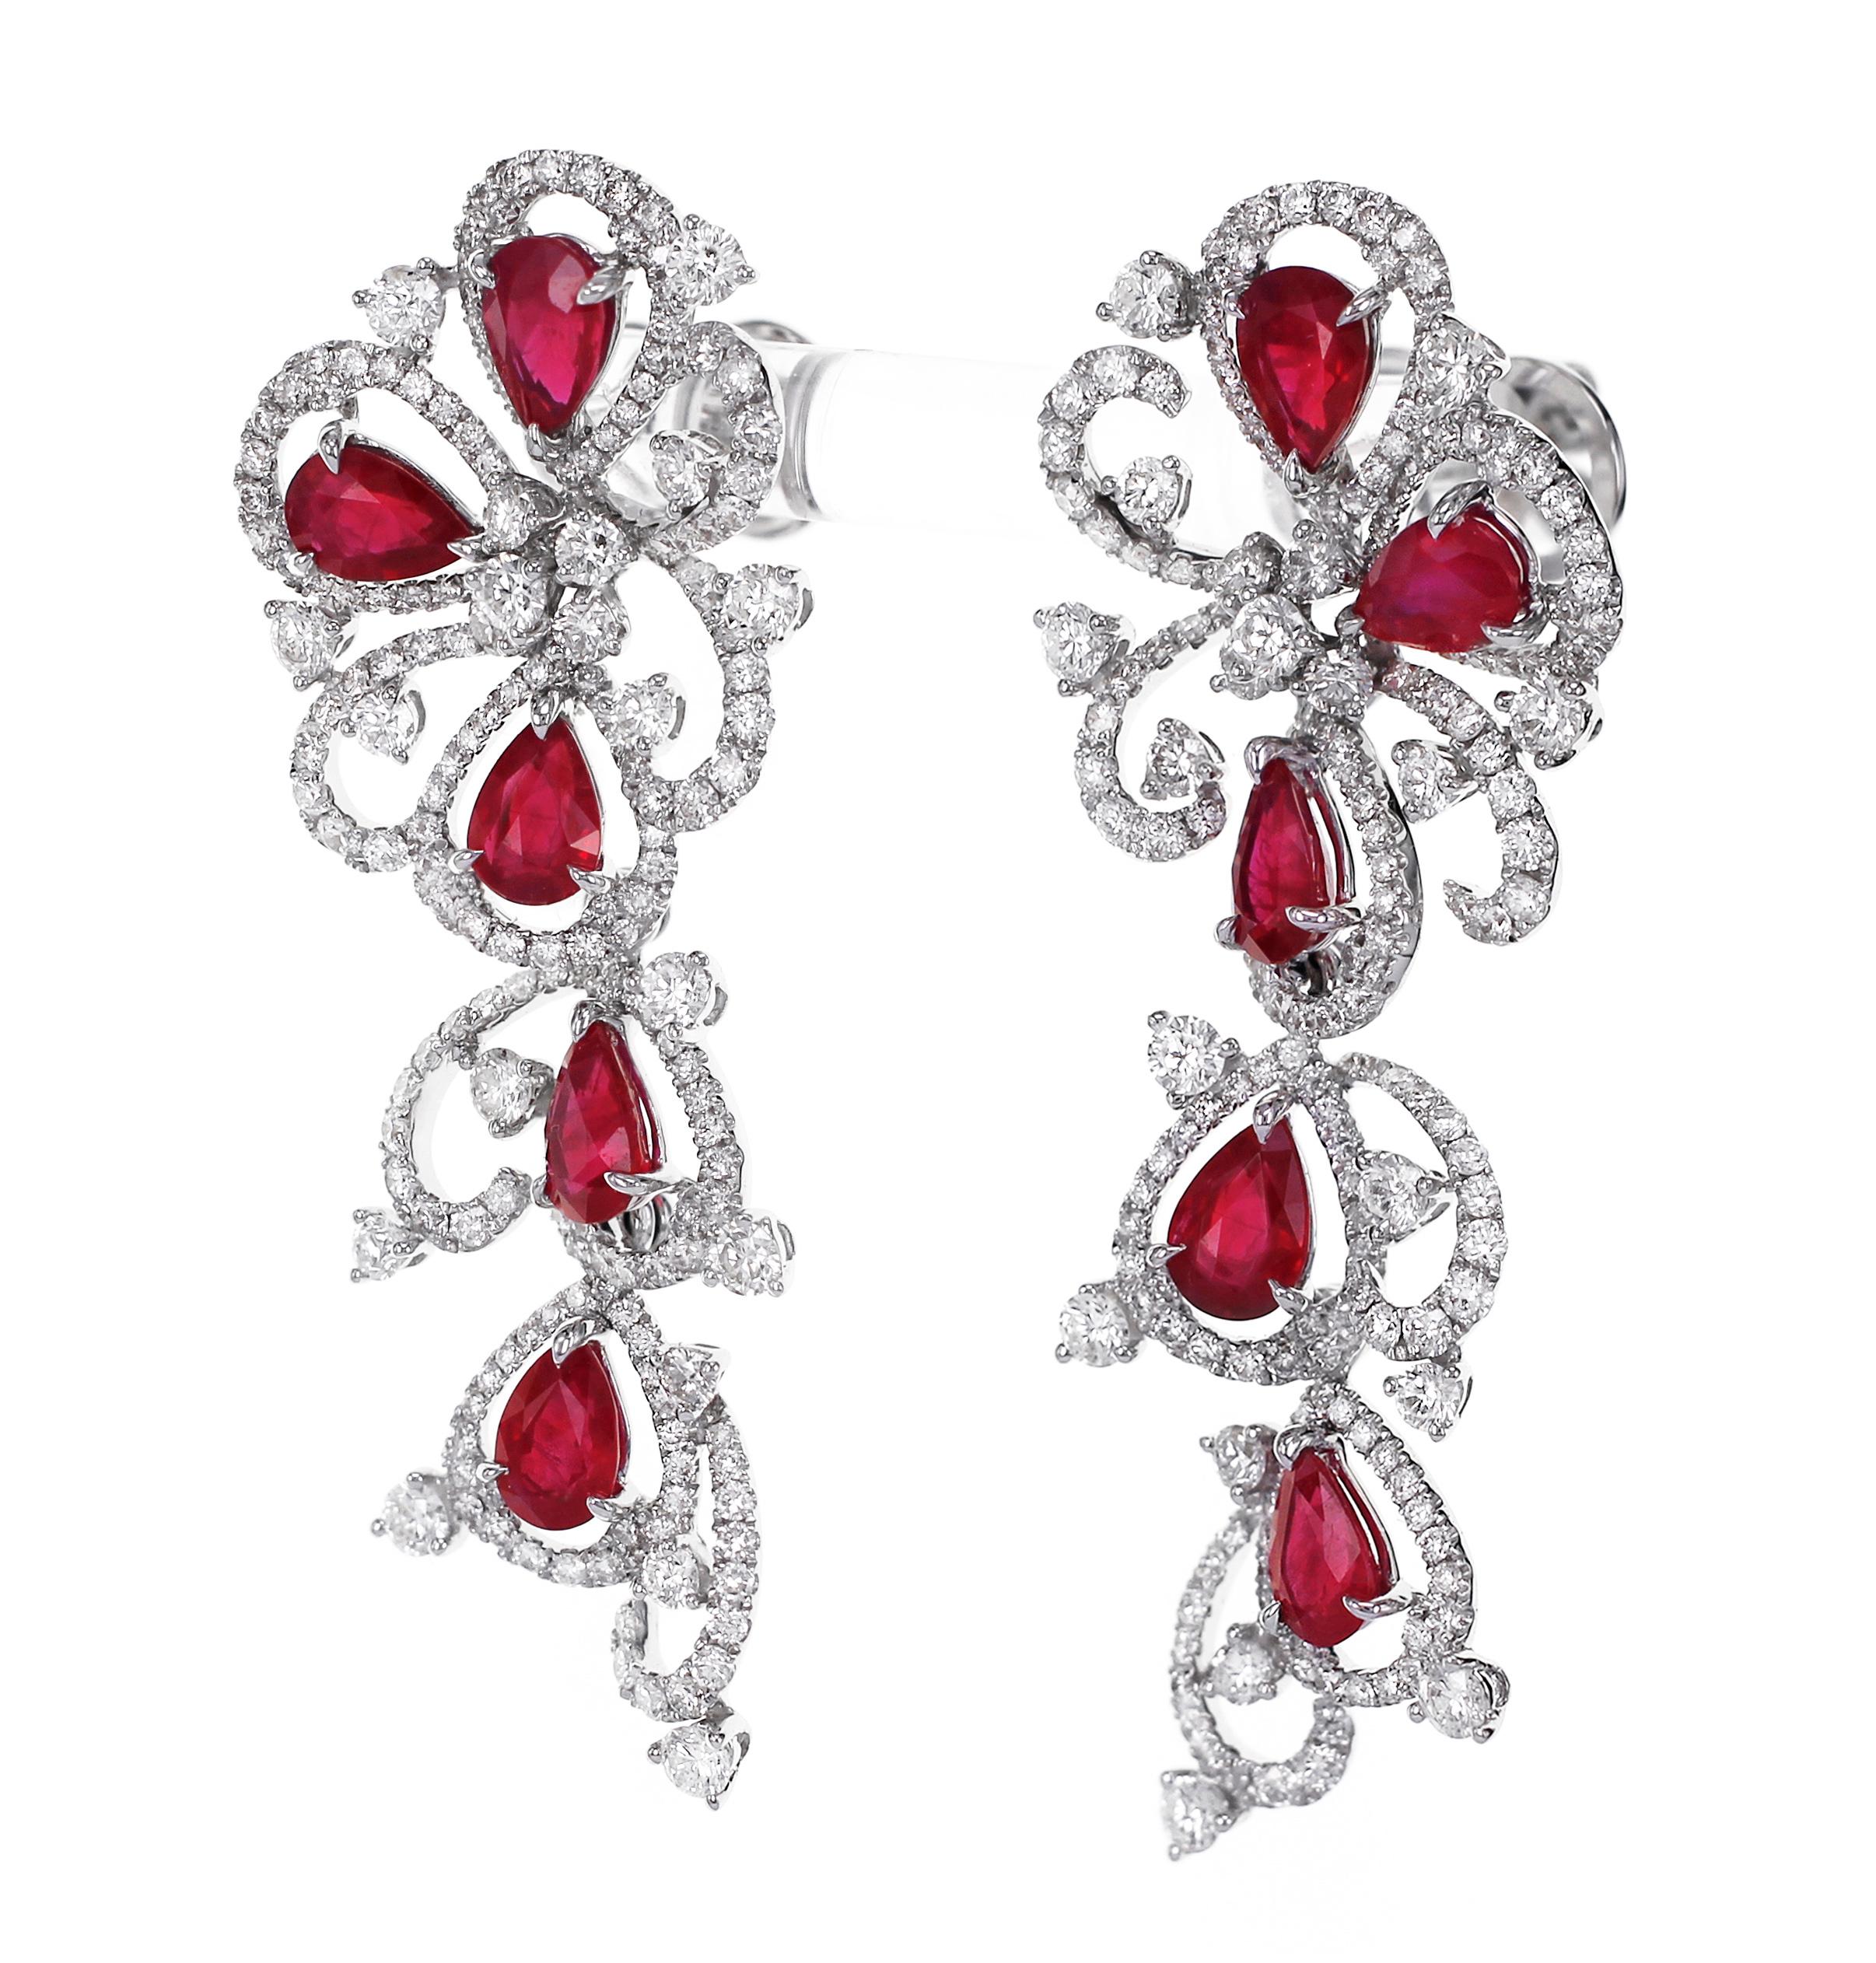 5.27 carats of vivid red ruby is set along with 3.73 carats of F color VS clarity round brilliant diamond. The earring has a graceful fall and is hand made with precision.
The details of the diamond are as follows:
Color: F
Clarity: VS

